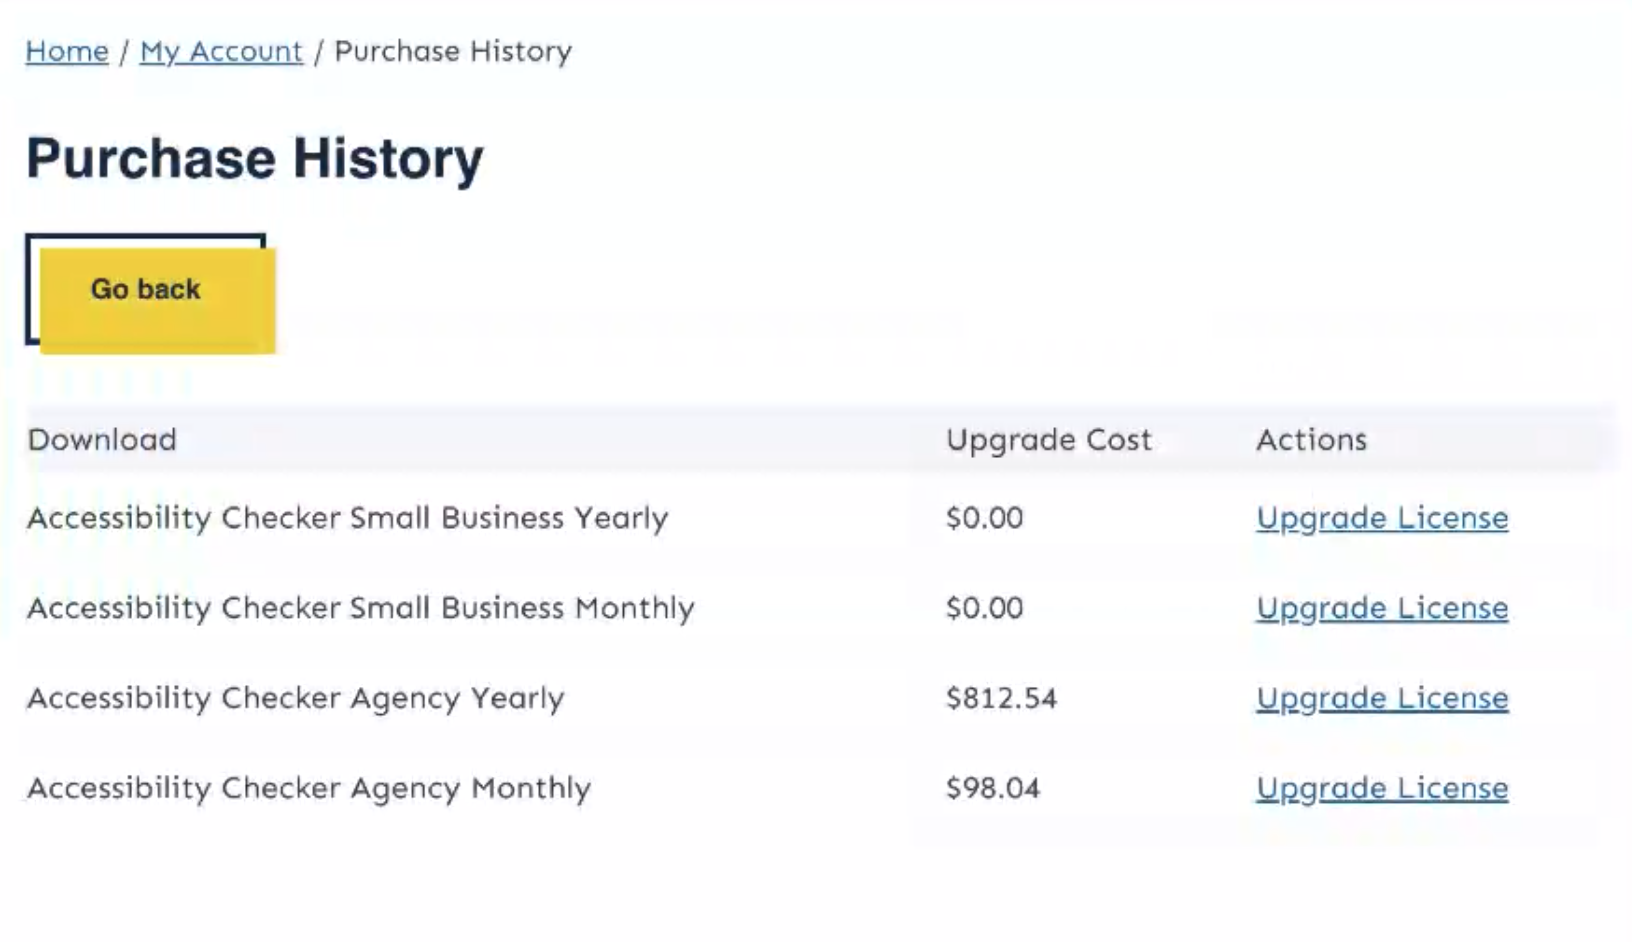 Purchase History page showing Upgrades to Small Business Yearly and monthly for $0, Agency yearly for $812.54, and Agency monthly for $98.04, in a table with Upgrade license links on each row.